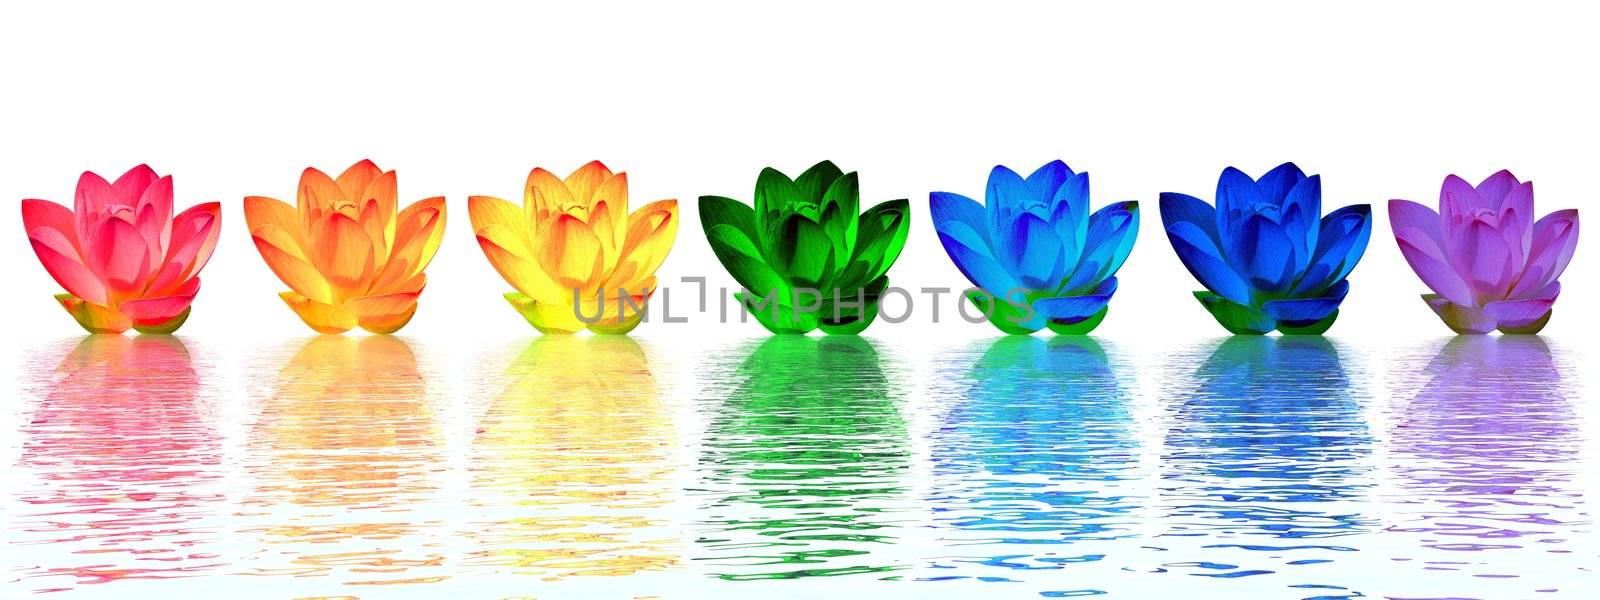 Chakra colors of lily flower upon water in white background